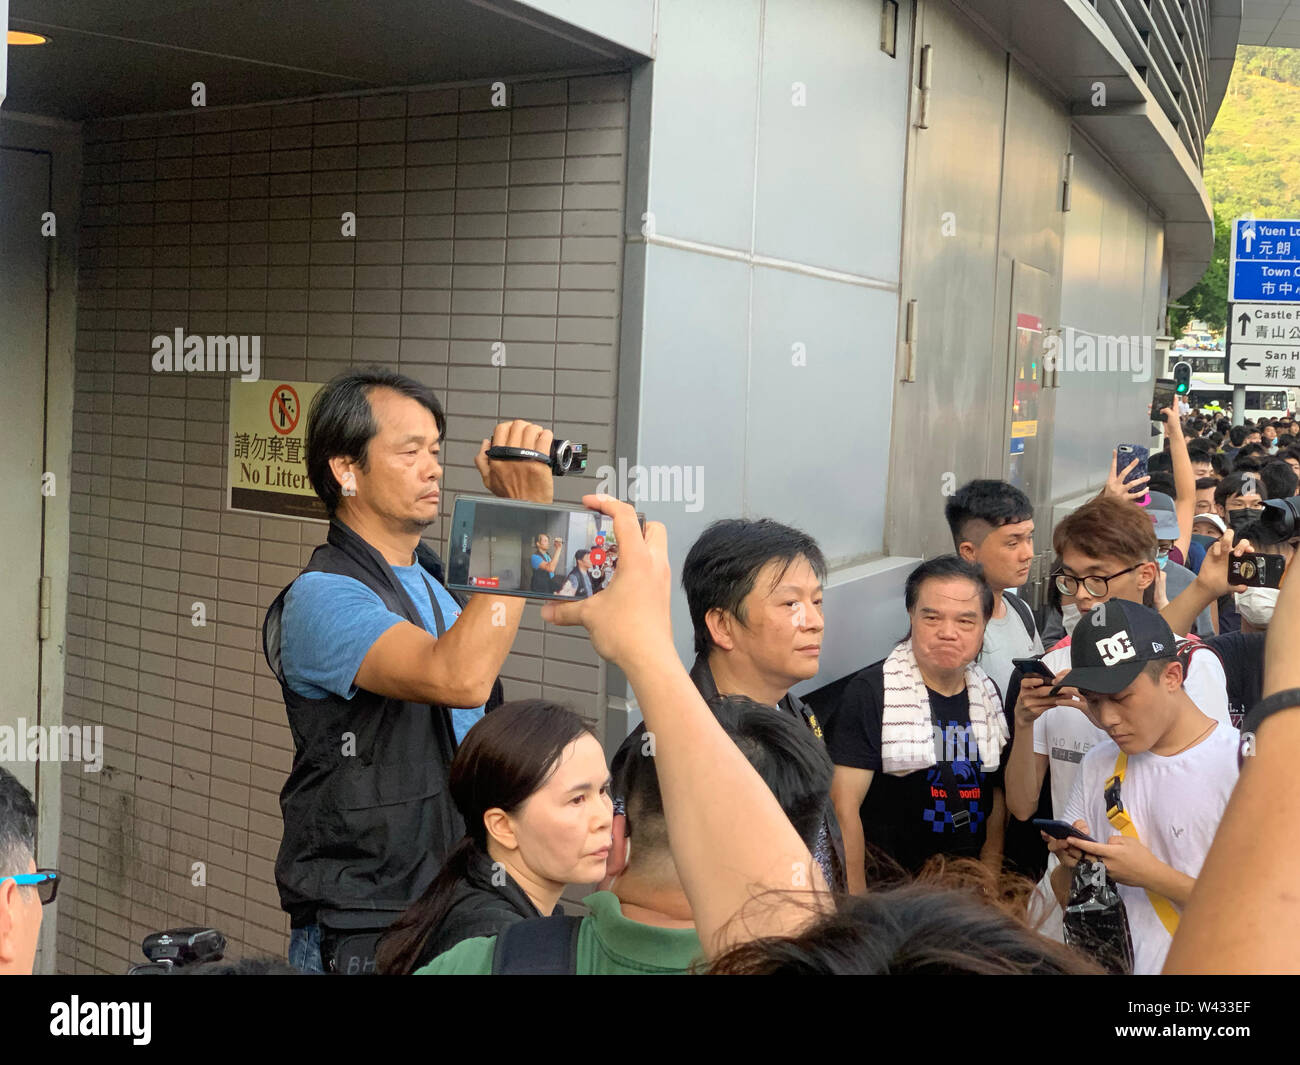 Tuen Mun, Hong Kong-July 6 2019: the police take a video and surround by the  protesters in Tuen Mun .the protesters took to the streets of Hong Kong to oppose a controversial extradition bill. Stock Photo